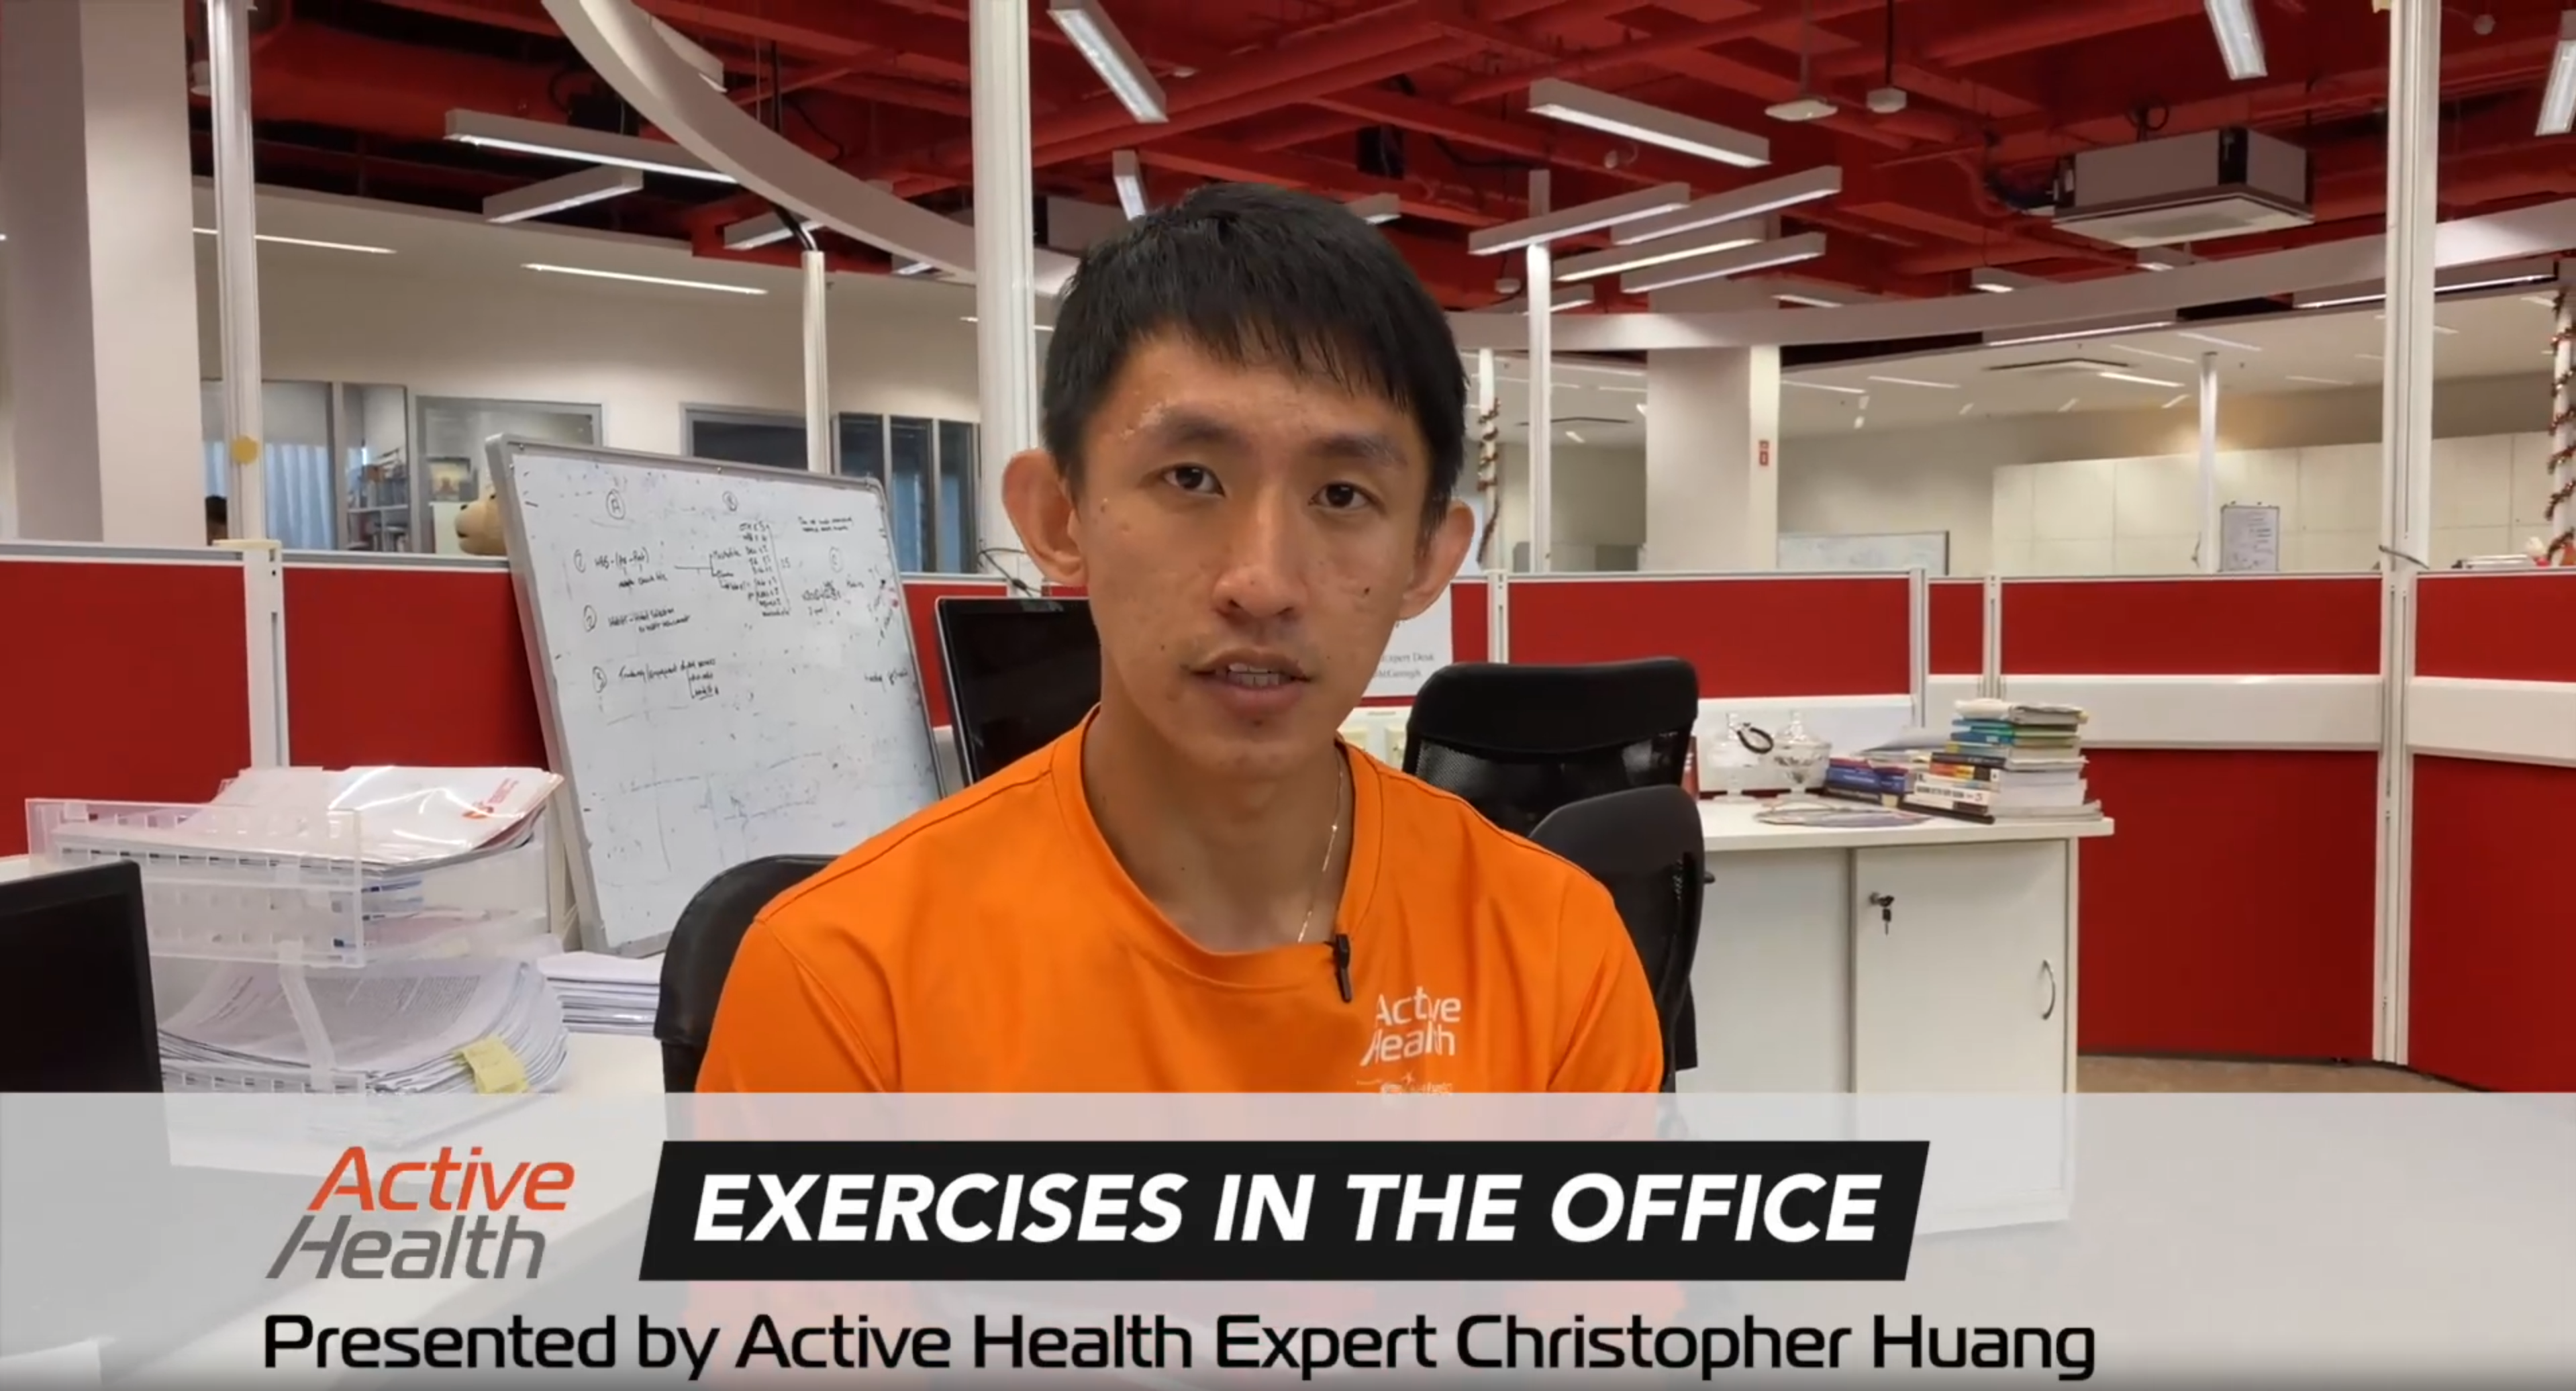 Ep 5 - 5 Simple Exercise Hacks To Relieve Stiffness & Aches At Work | Active Health